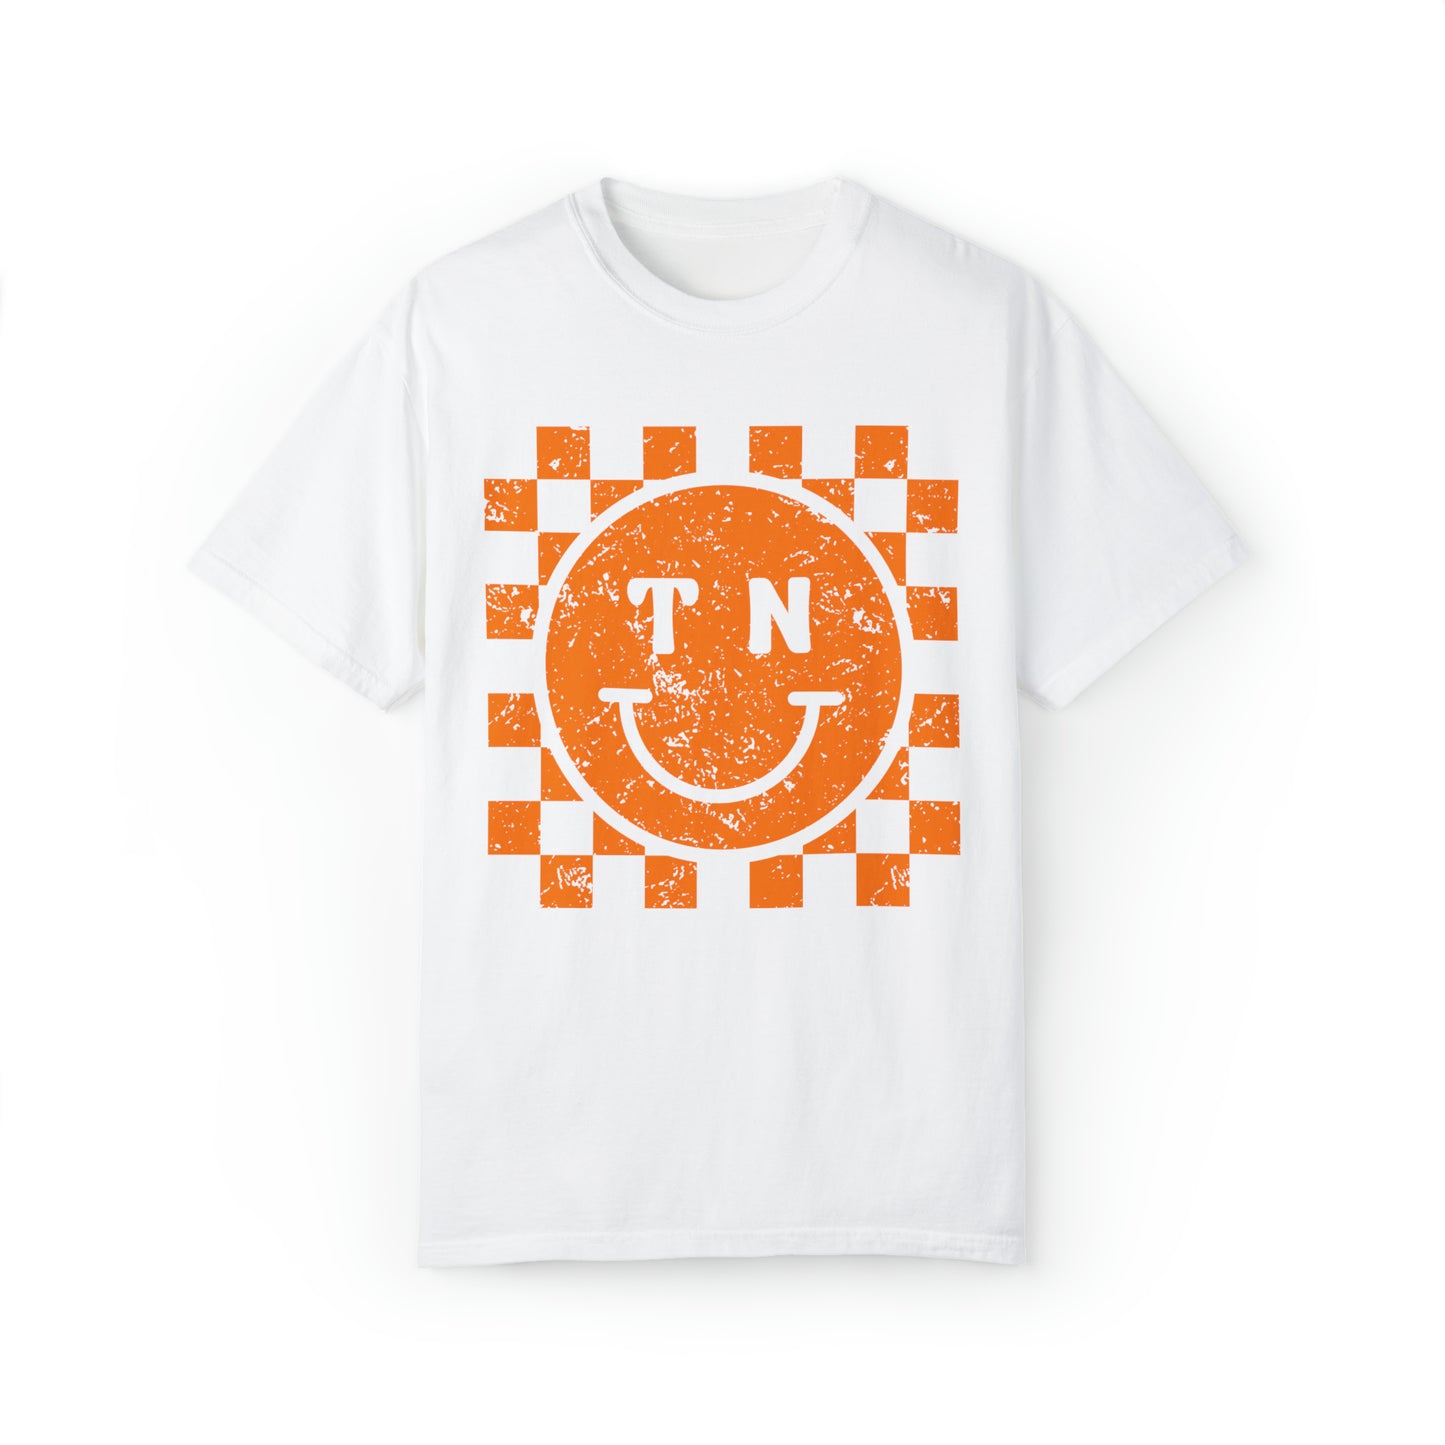 Tennessee Checkered Smiley Face Shirt